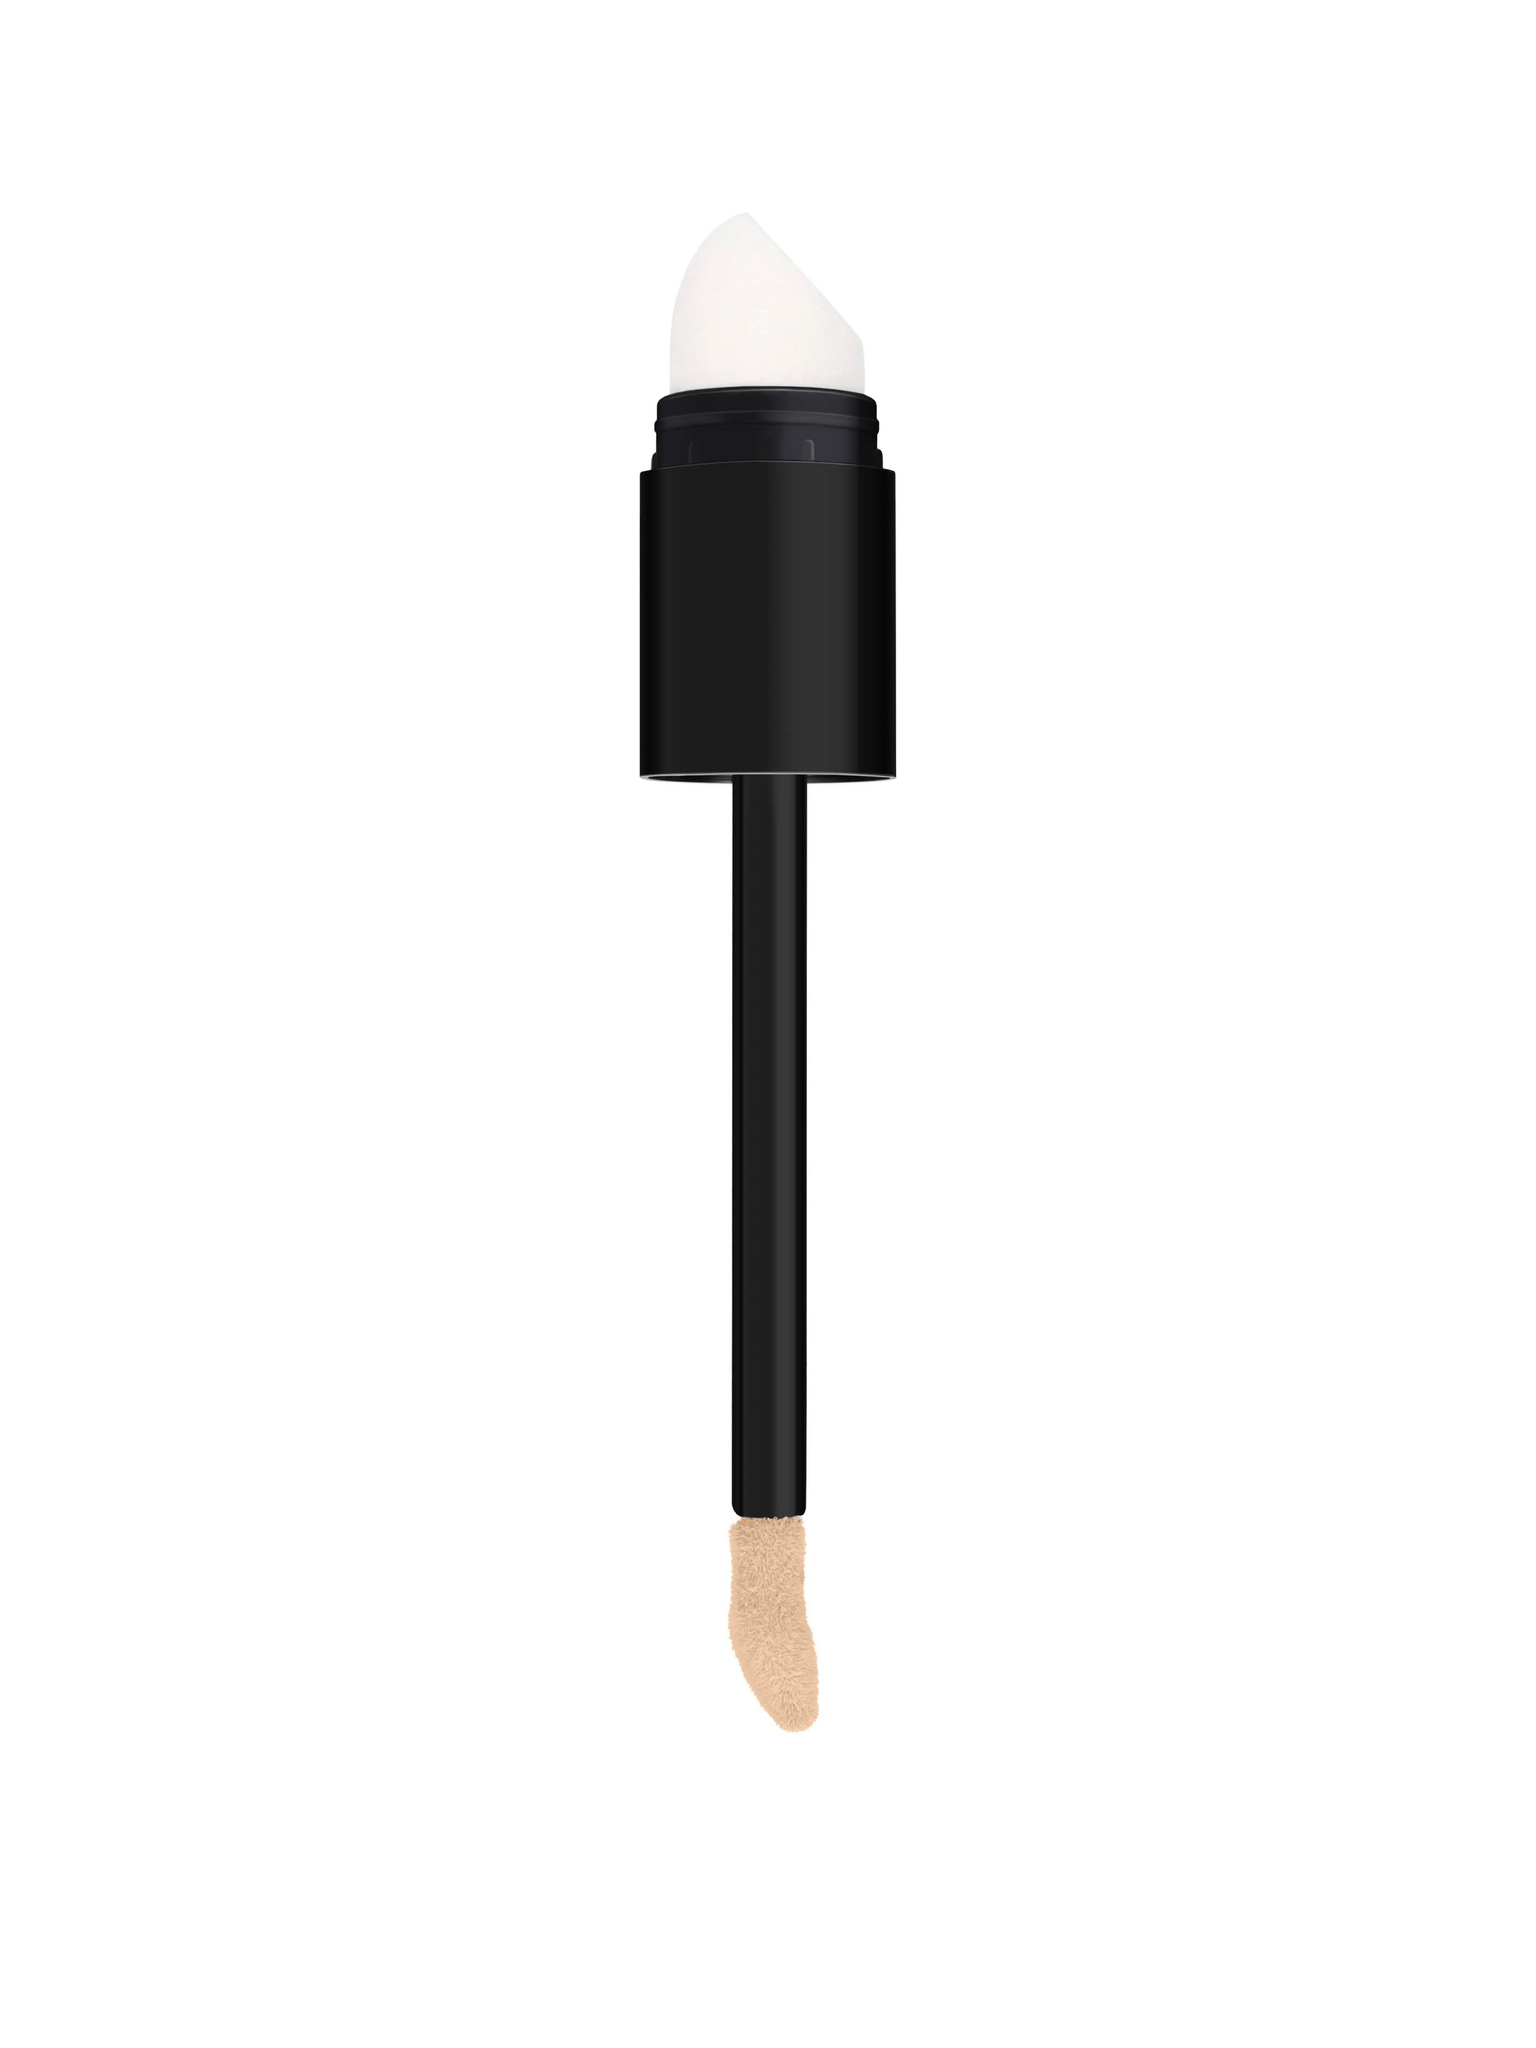 W7 Nice Touch Concealer - Sand